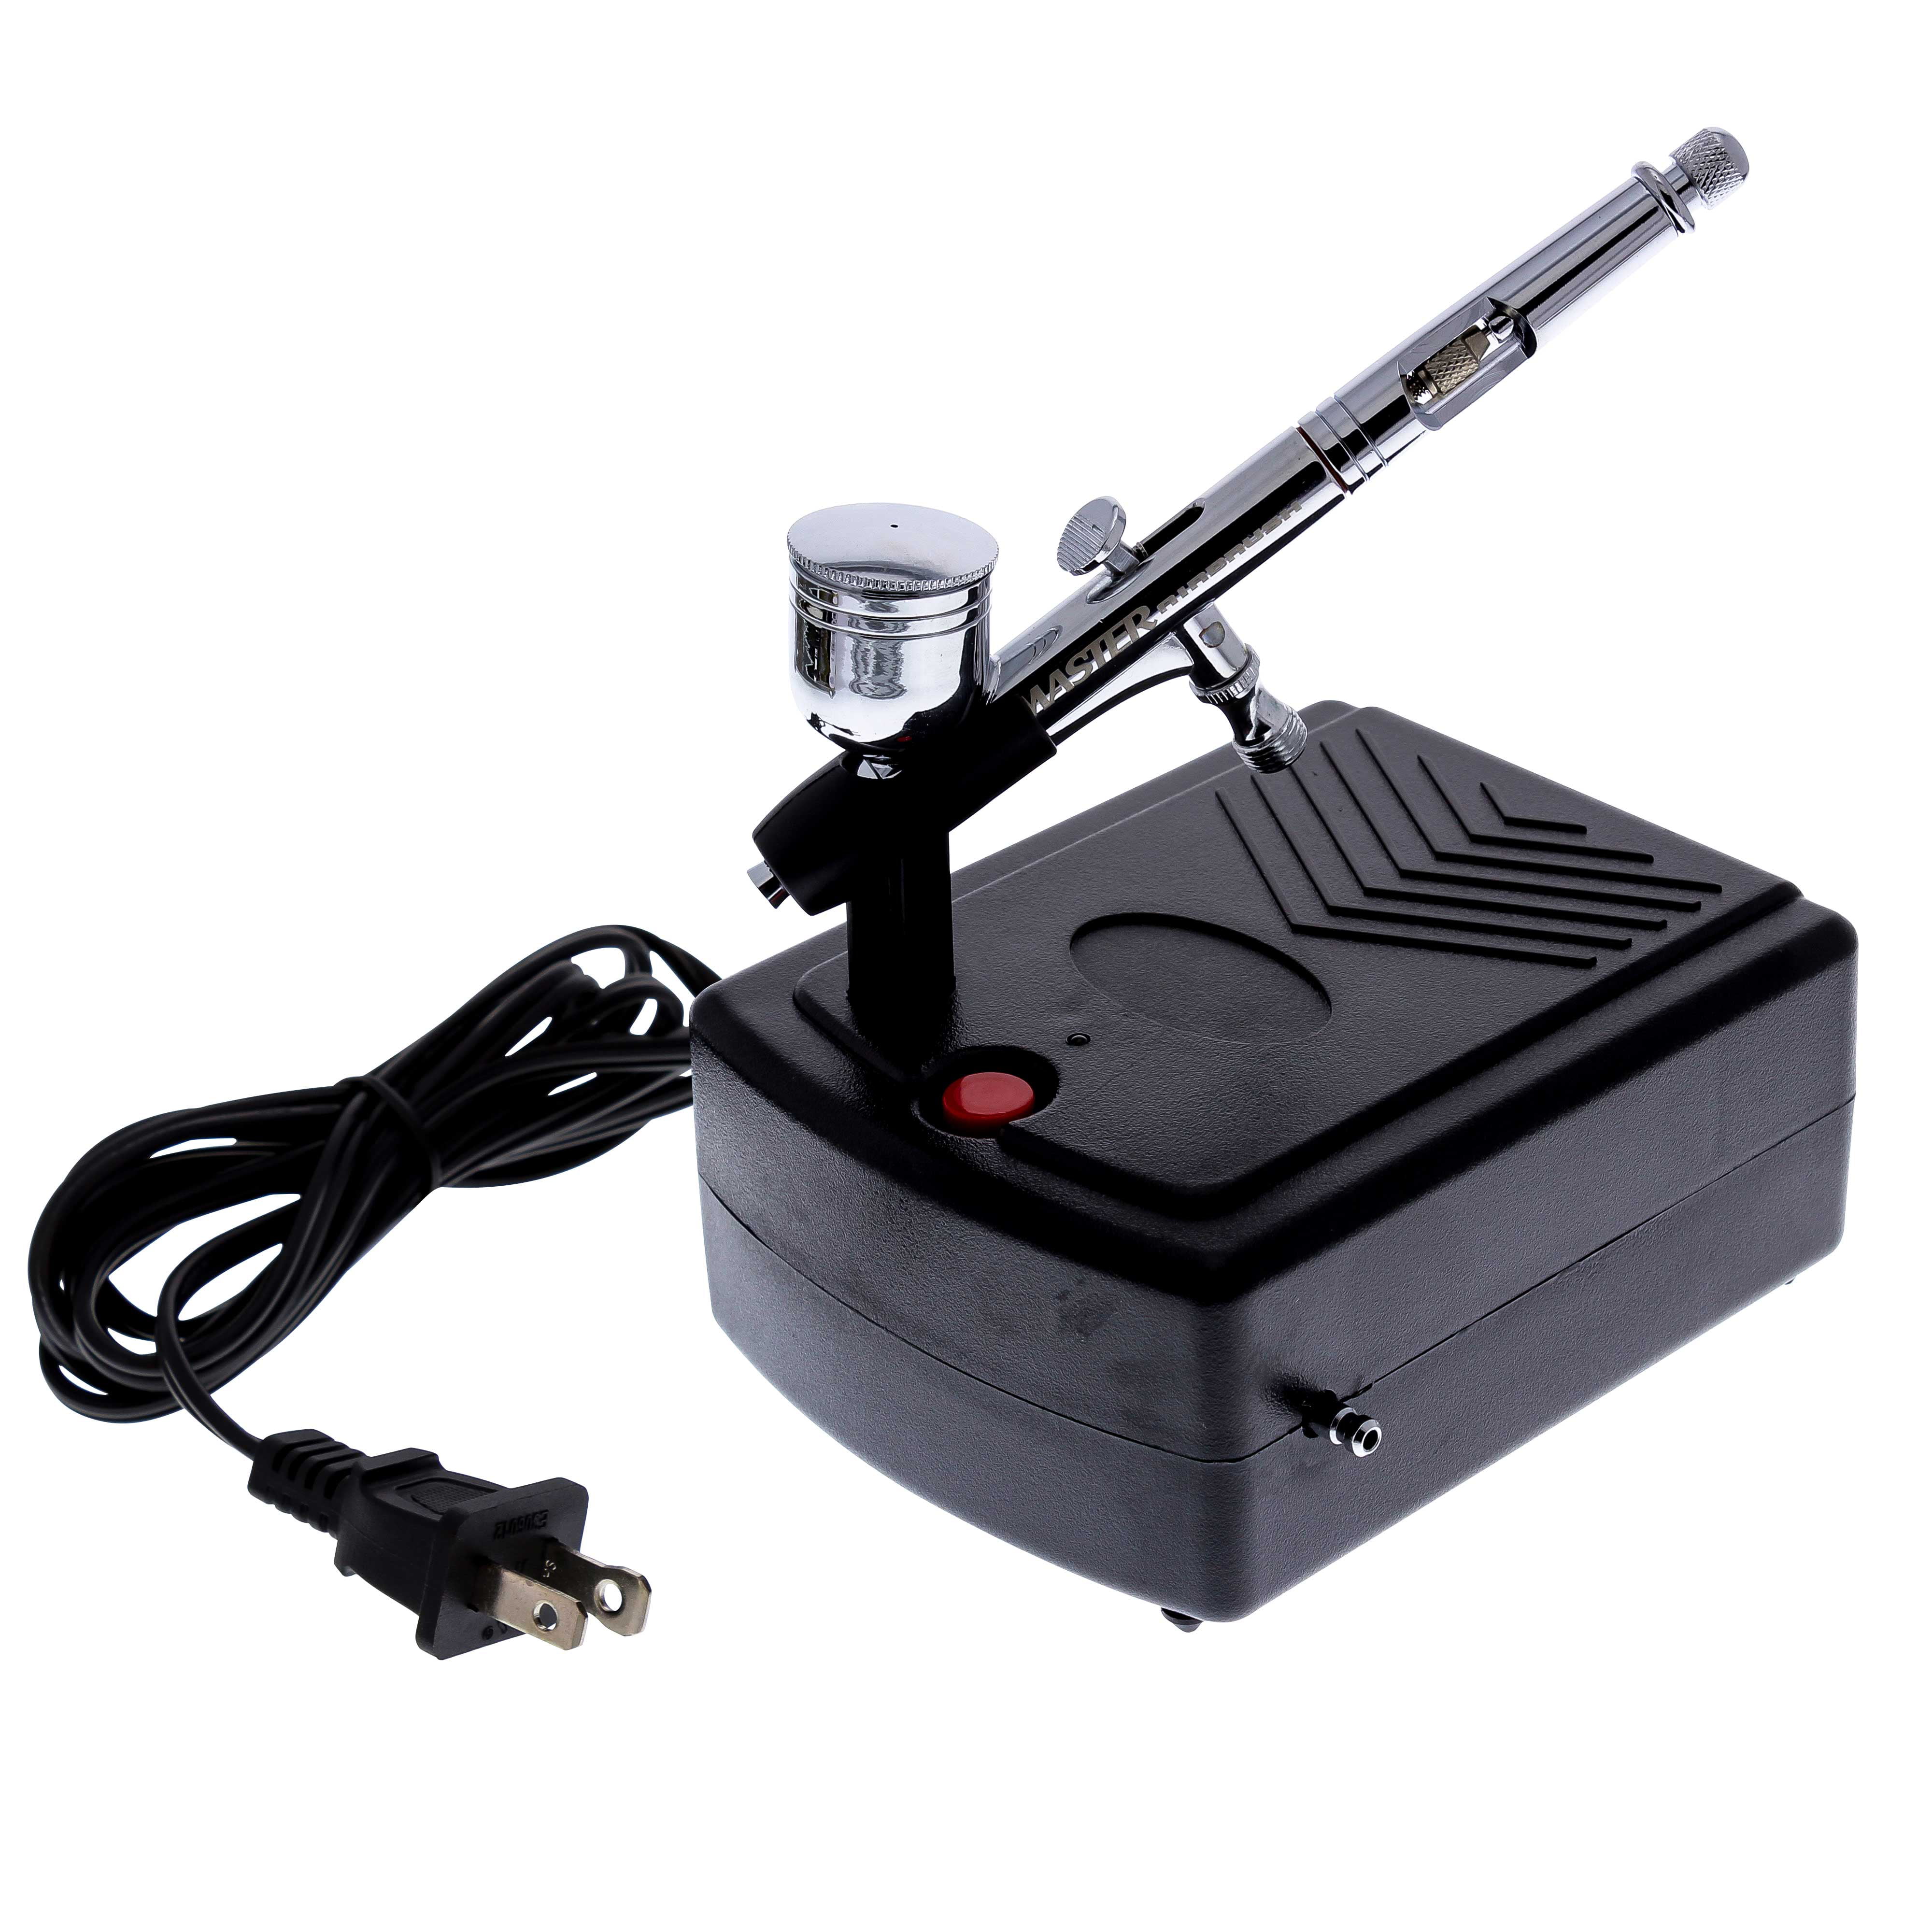 PME Air Brush & Compressor Kit, for Cake Craft and Cake Decorating